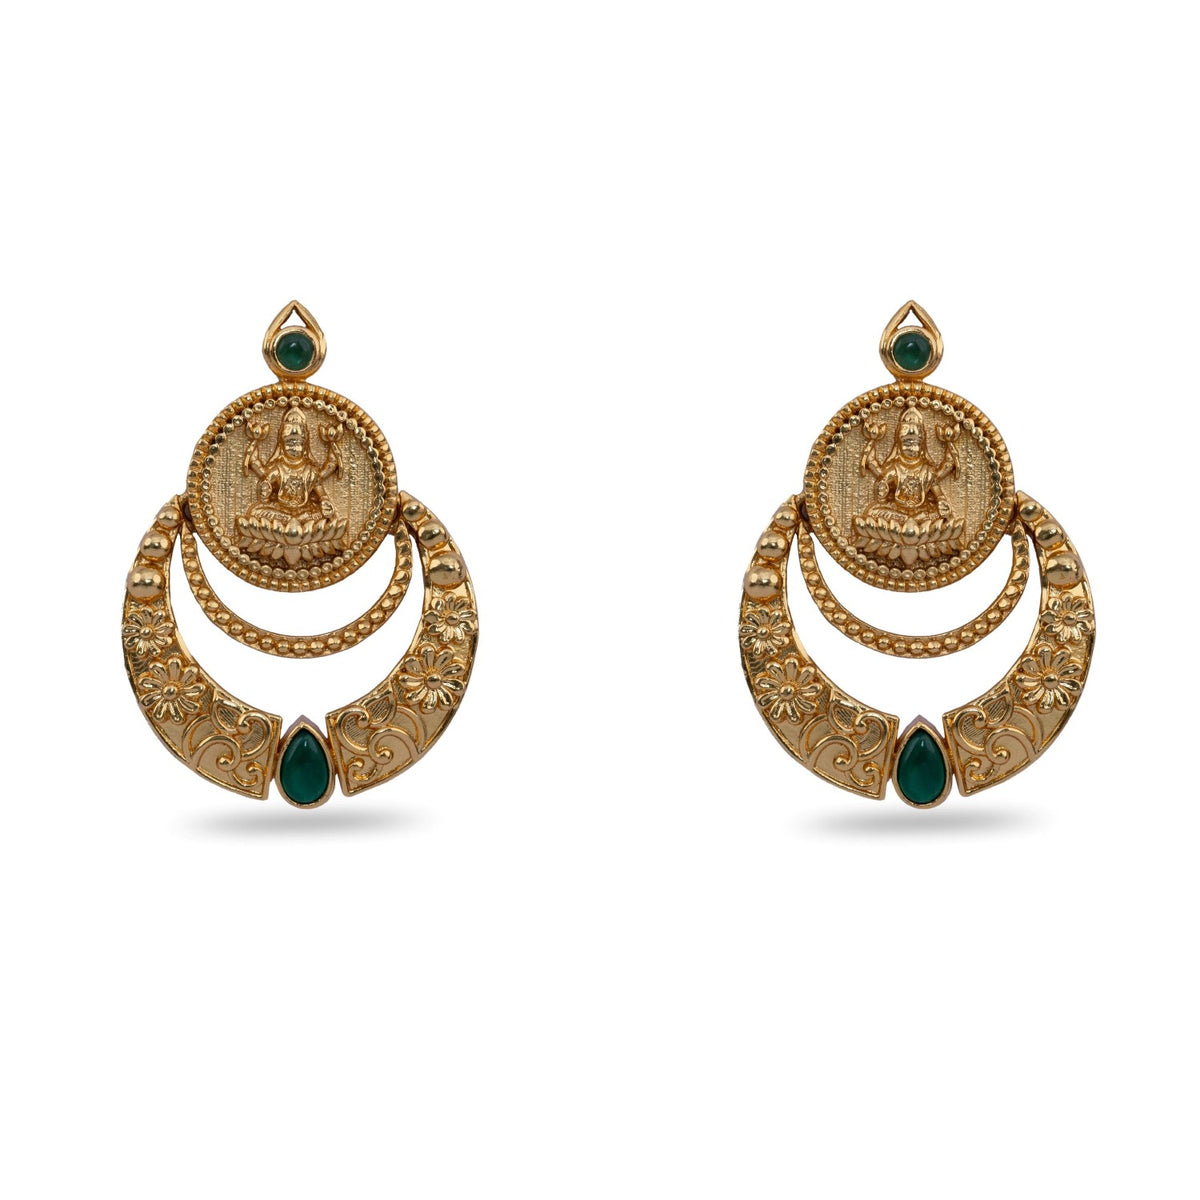 A close up image of a teardrop shaped earrings, featuring green kempu stones.